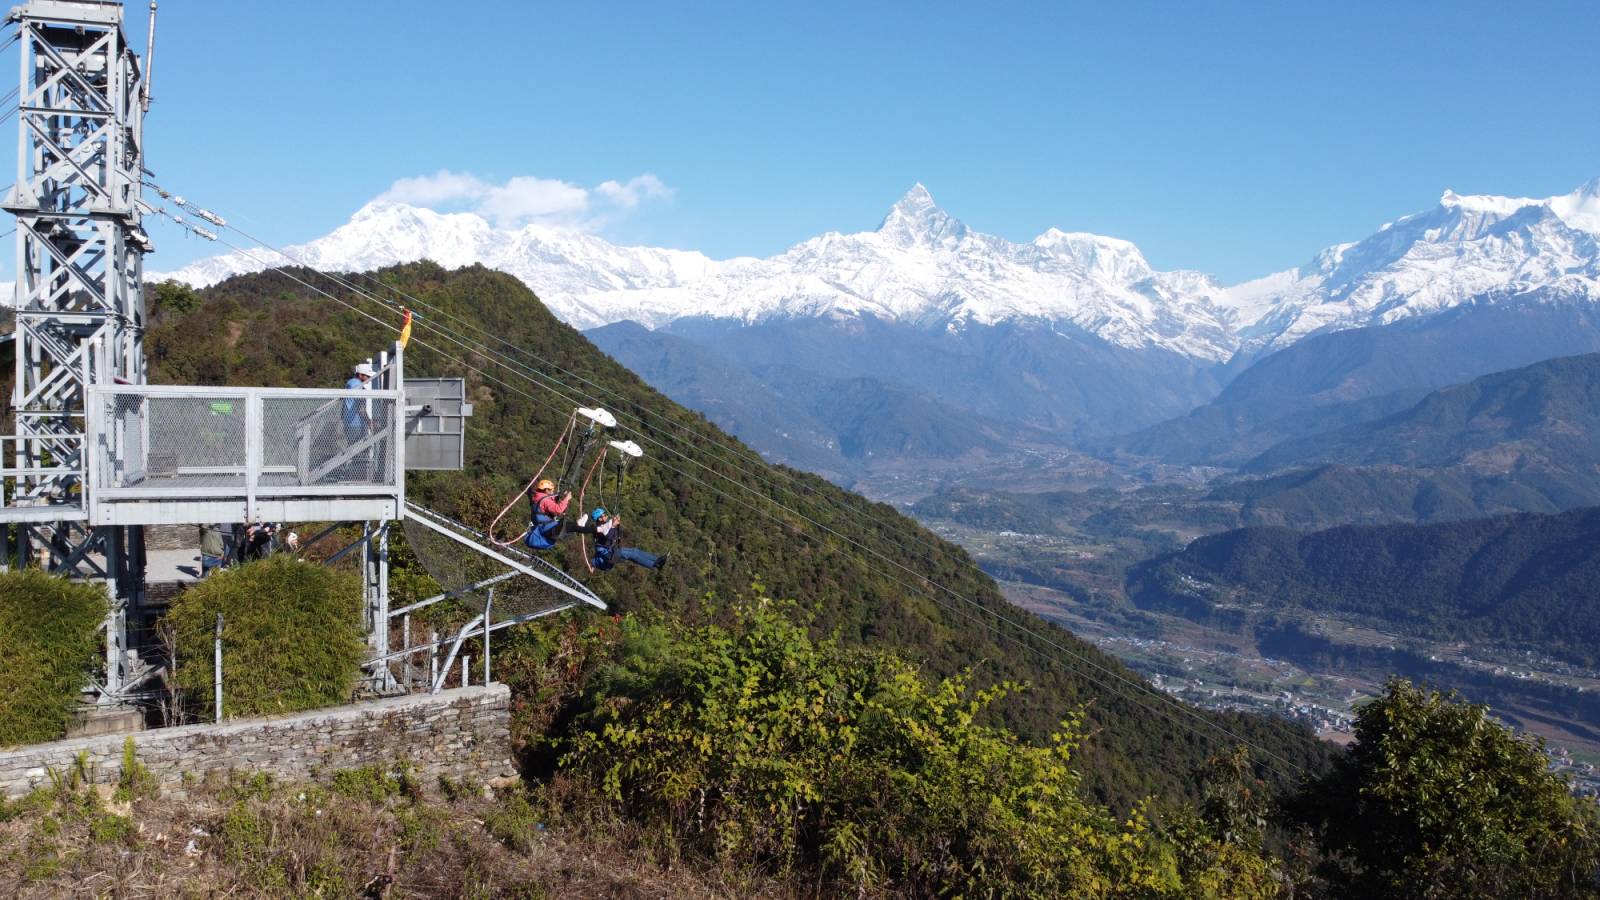 Pokhara's zipline is the 'tallest' and 'steepest' in the world